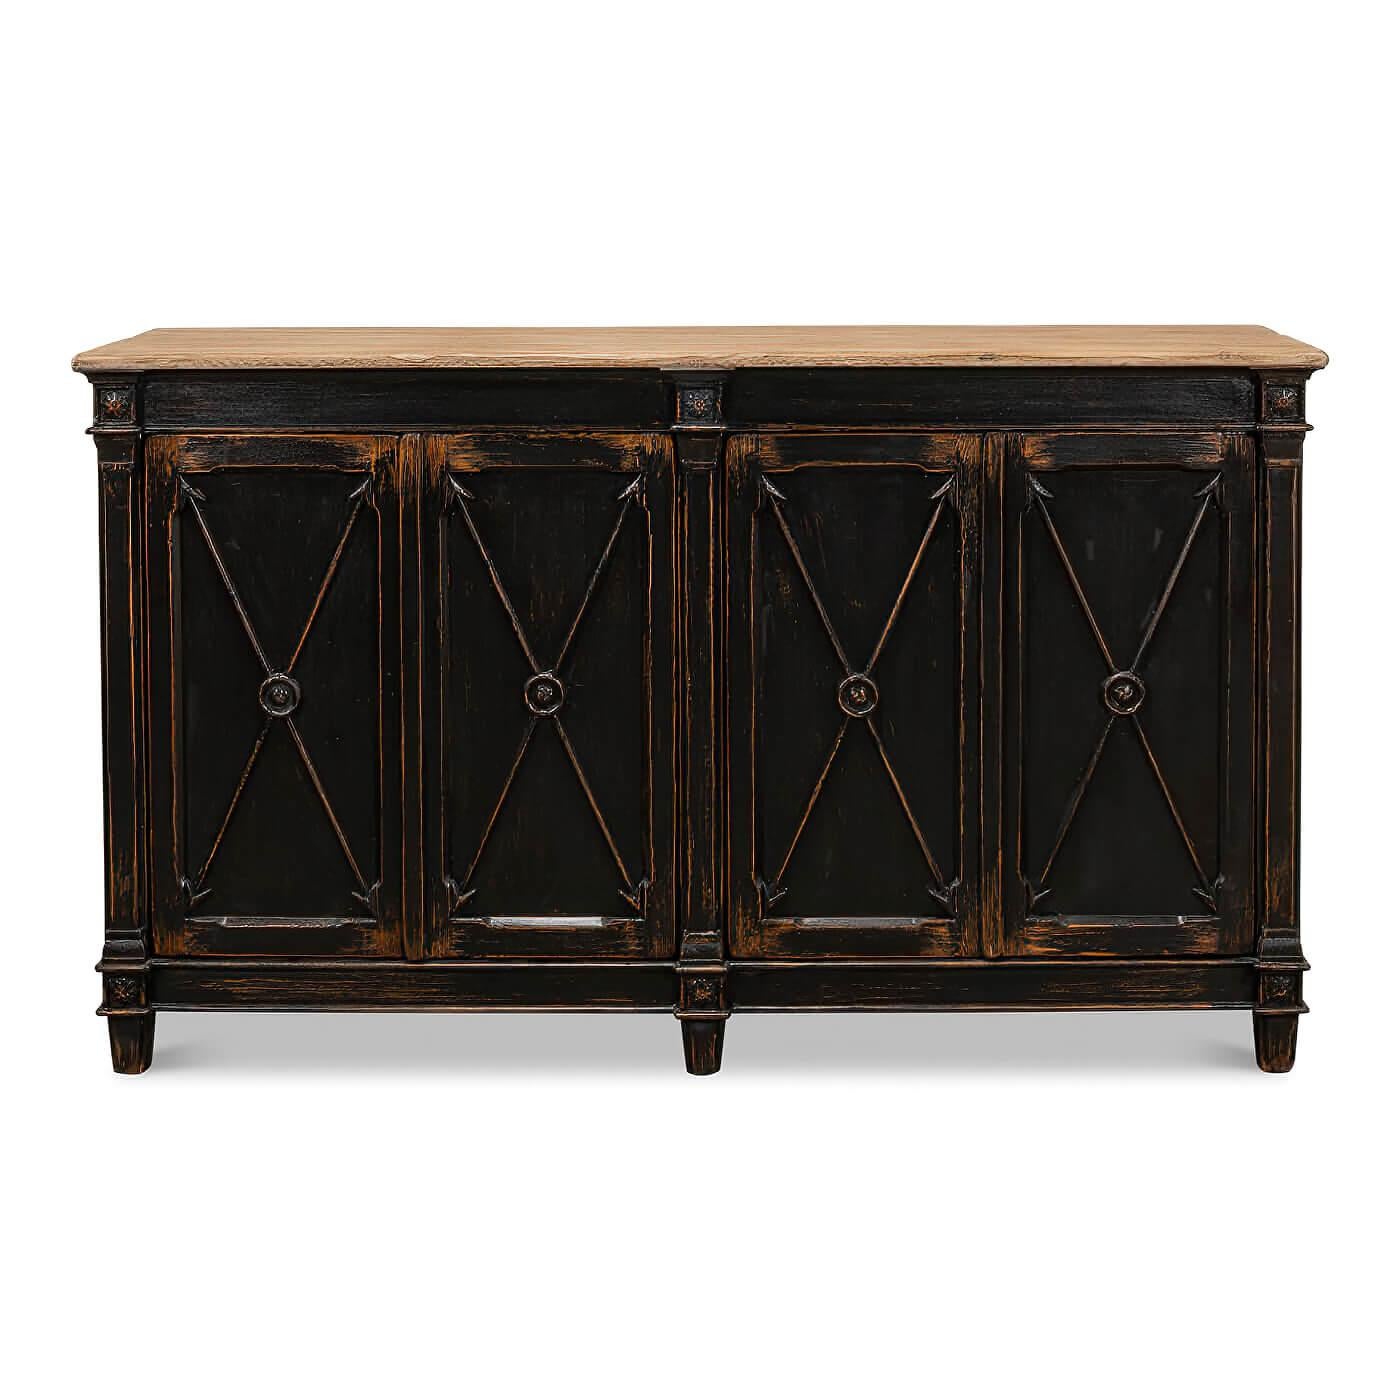 A French Directoire style antiqued buffet with an ebonized finish to the four-door cabinet and with a natural pine top. Each door has a cross arrow design. This piece is crafted in pine and has an antiqued rustic finish. The interior has two